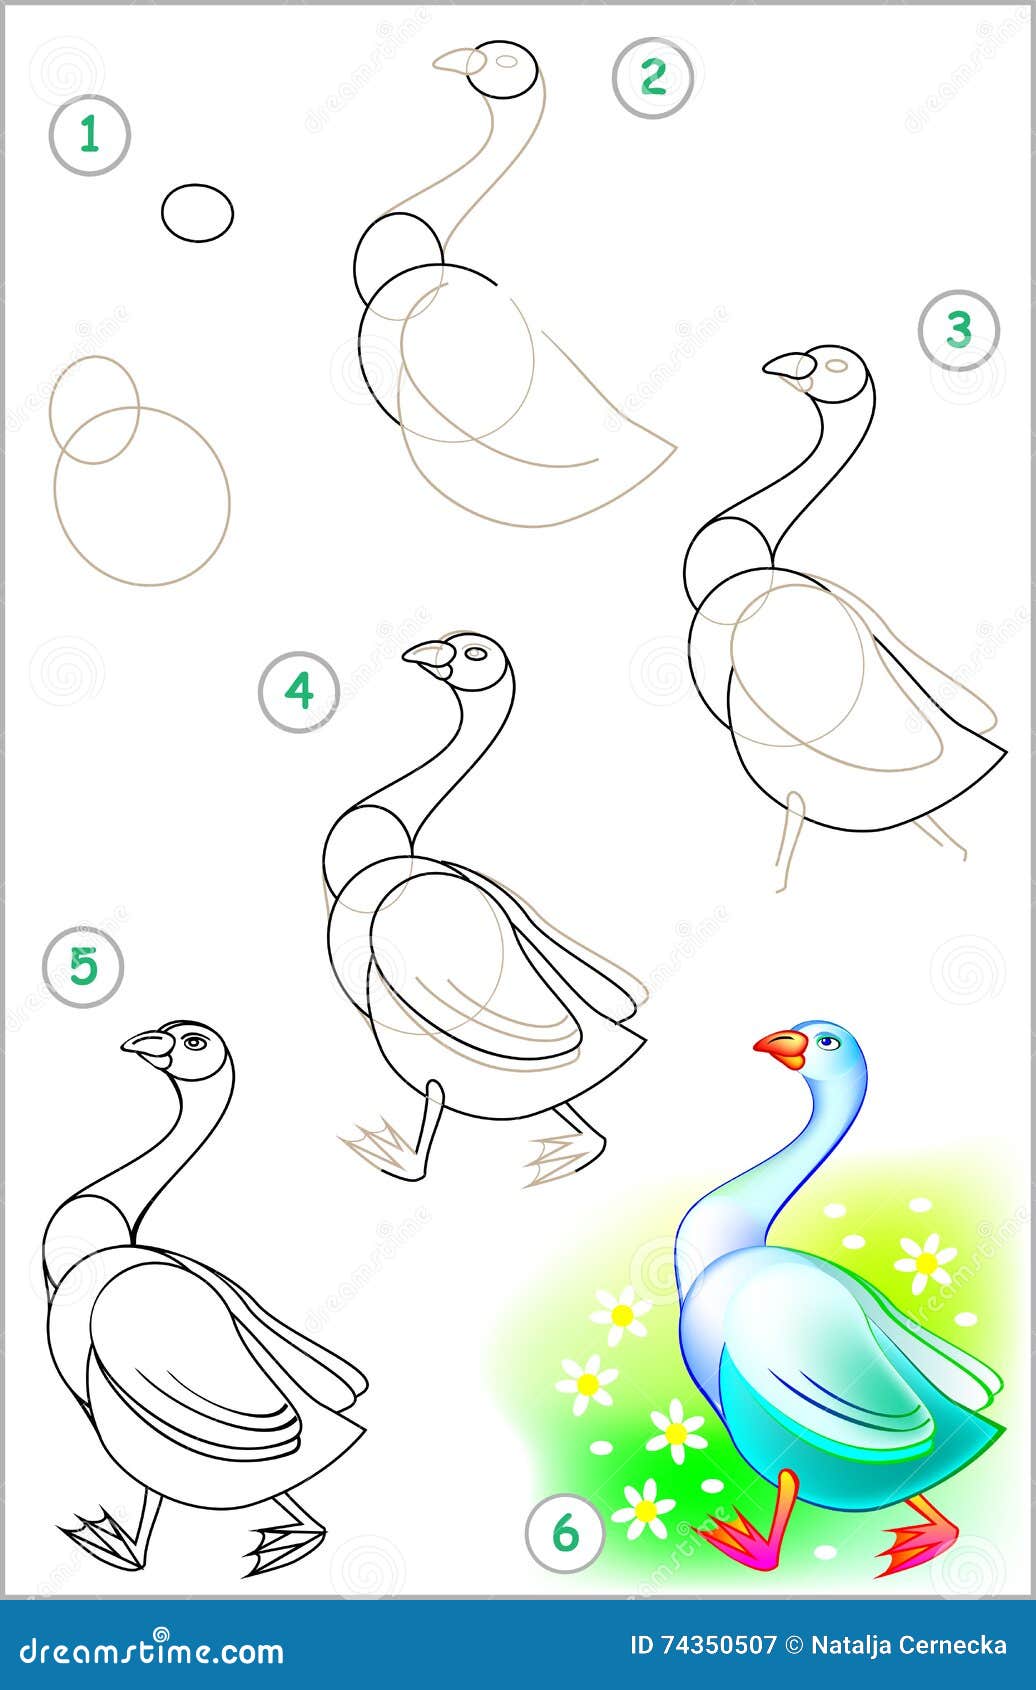 How To Draw A Goose Easy Step By Step